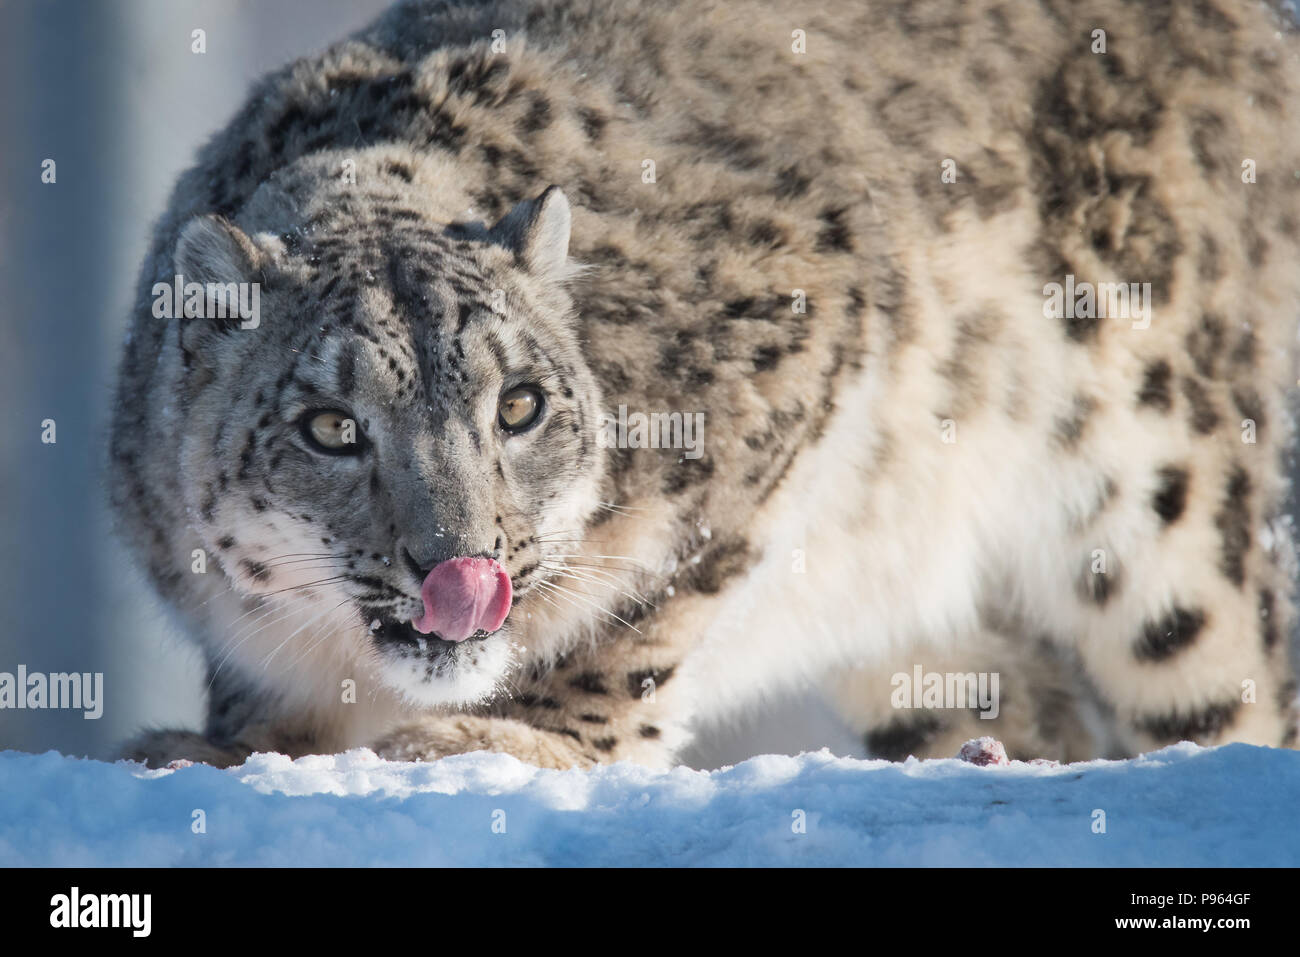 Female snow leopard Ena enjoys a treat at The Toronto Zoo, where she is part of a successful captive breeding program for this vulnerable species. Stock Photo